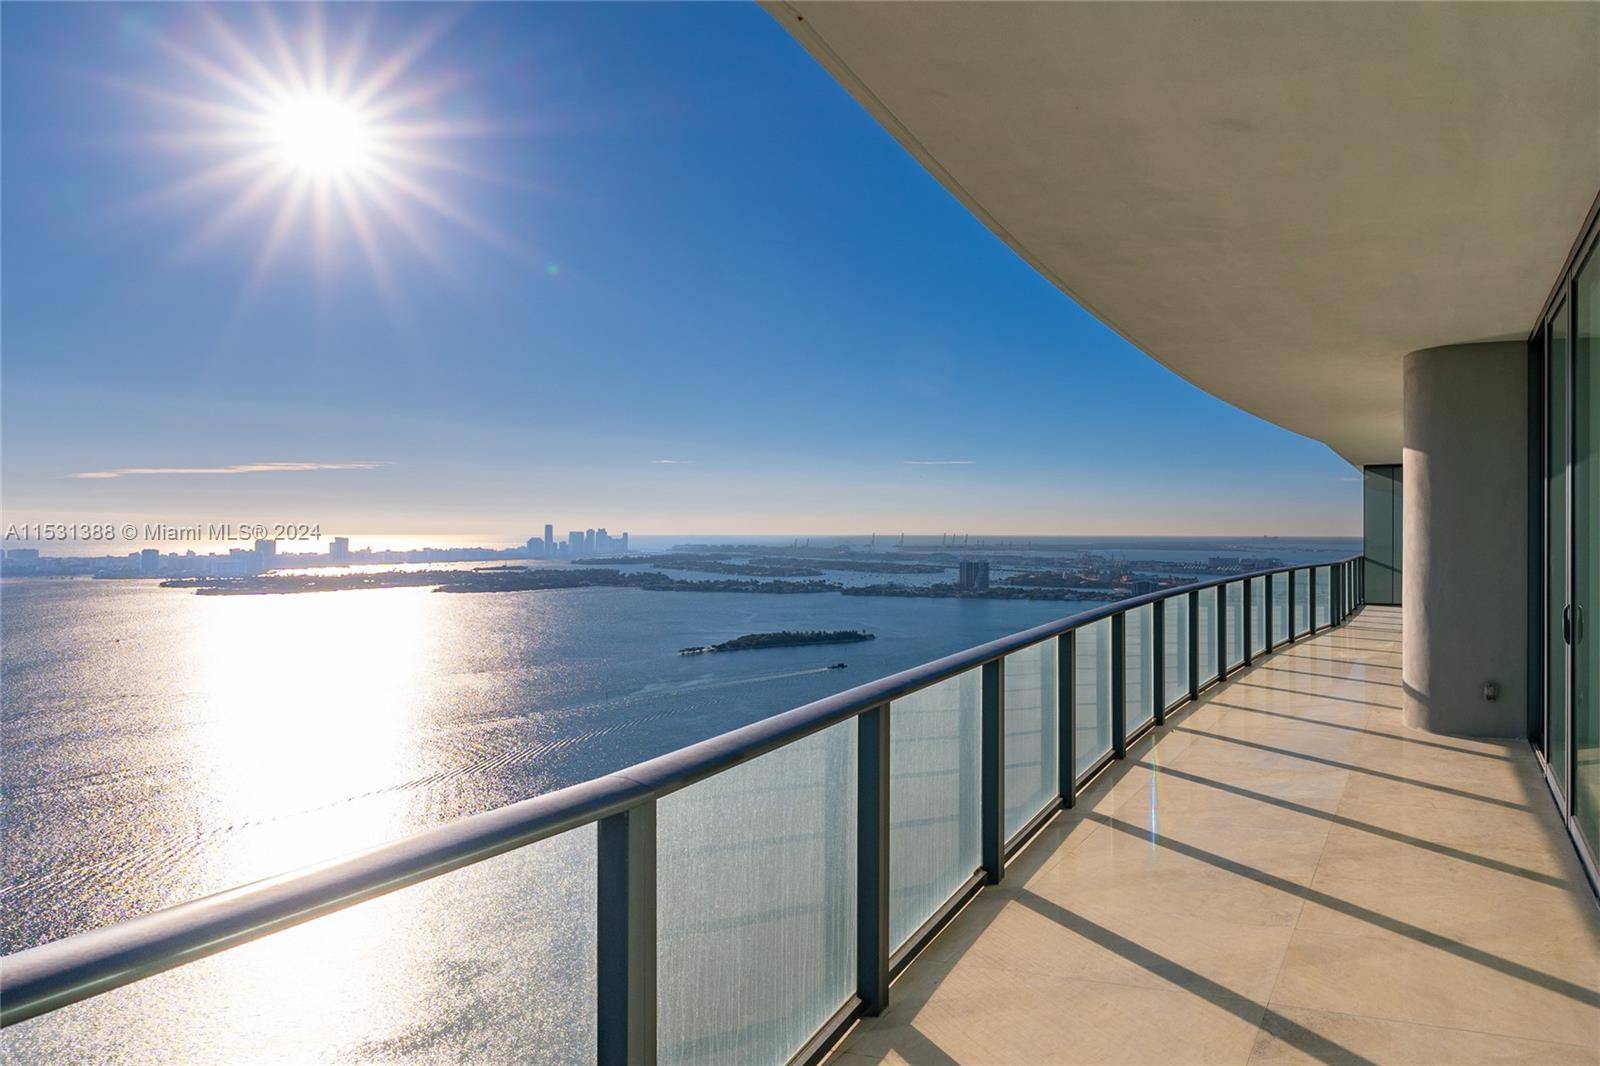 This breathtaking Penthouse on the 50th floor boasts endless Ocean and Bay views, epitomizing the essence of Miami luxury.